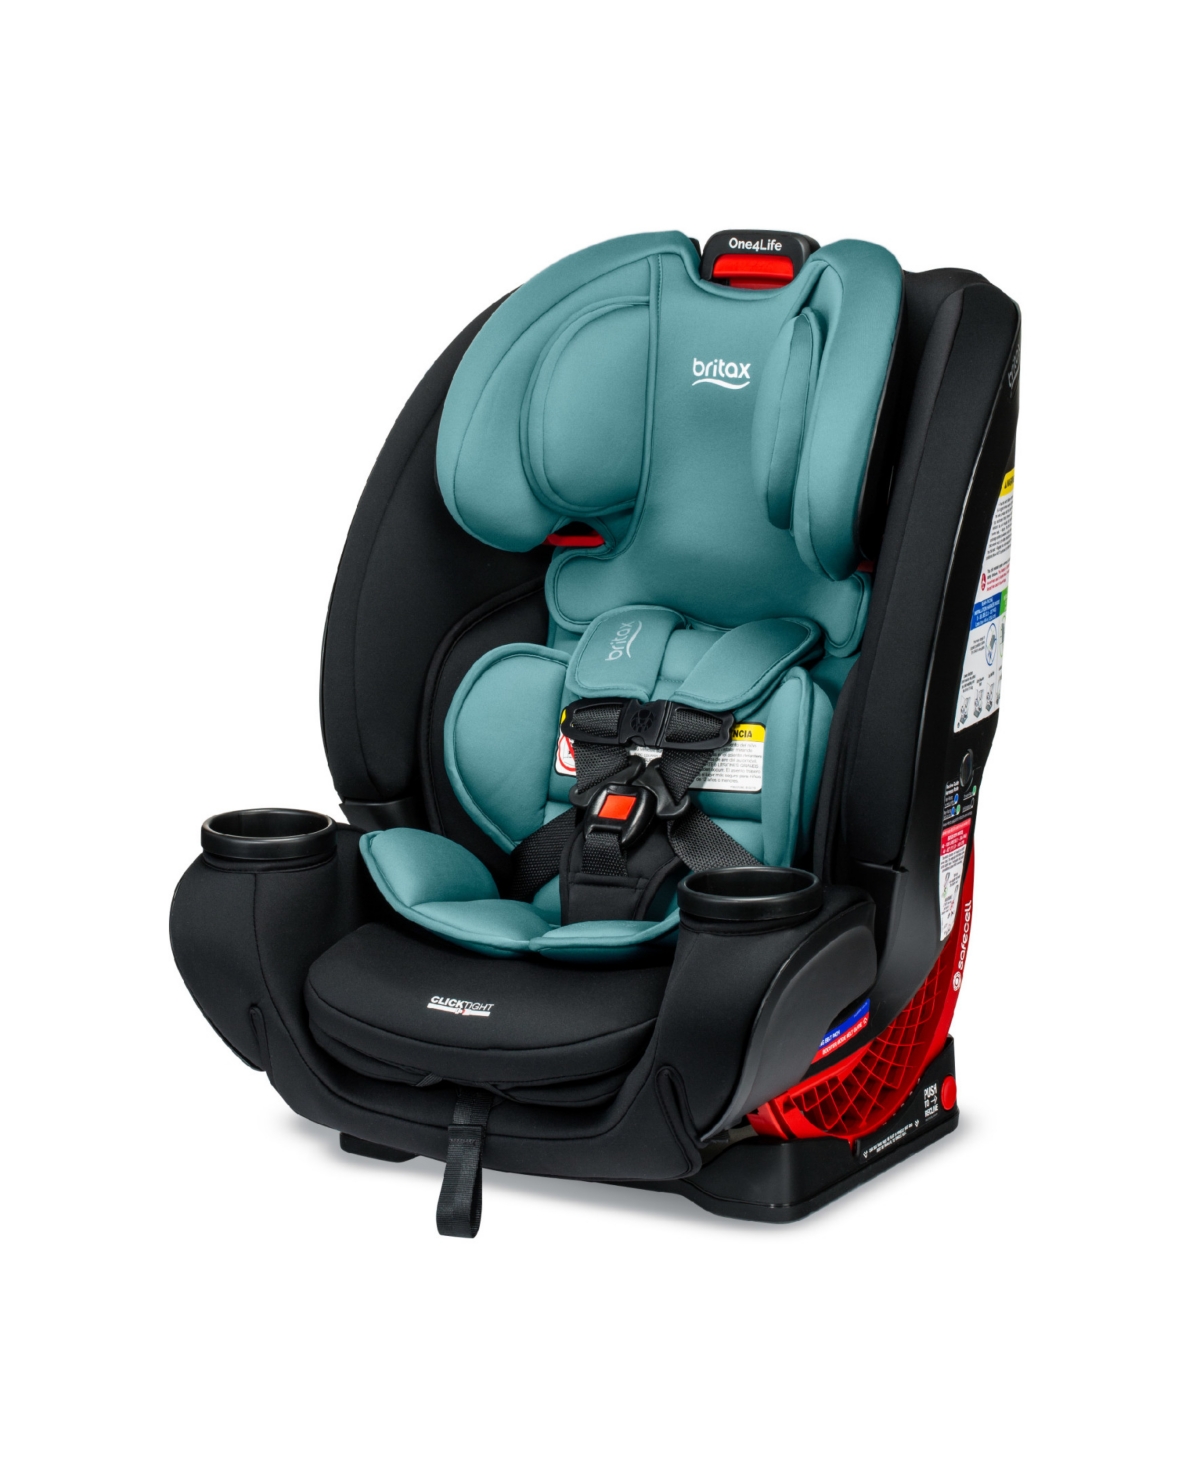 Britax One4life All-in-one Car Seat In Jade Onyx